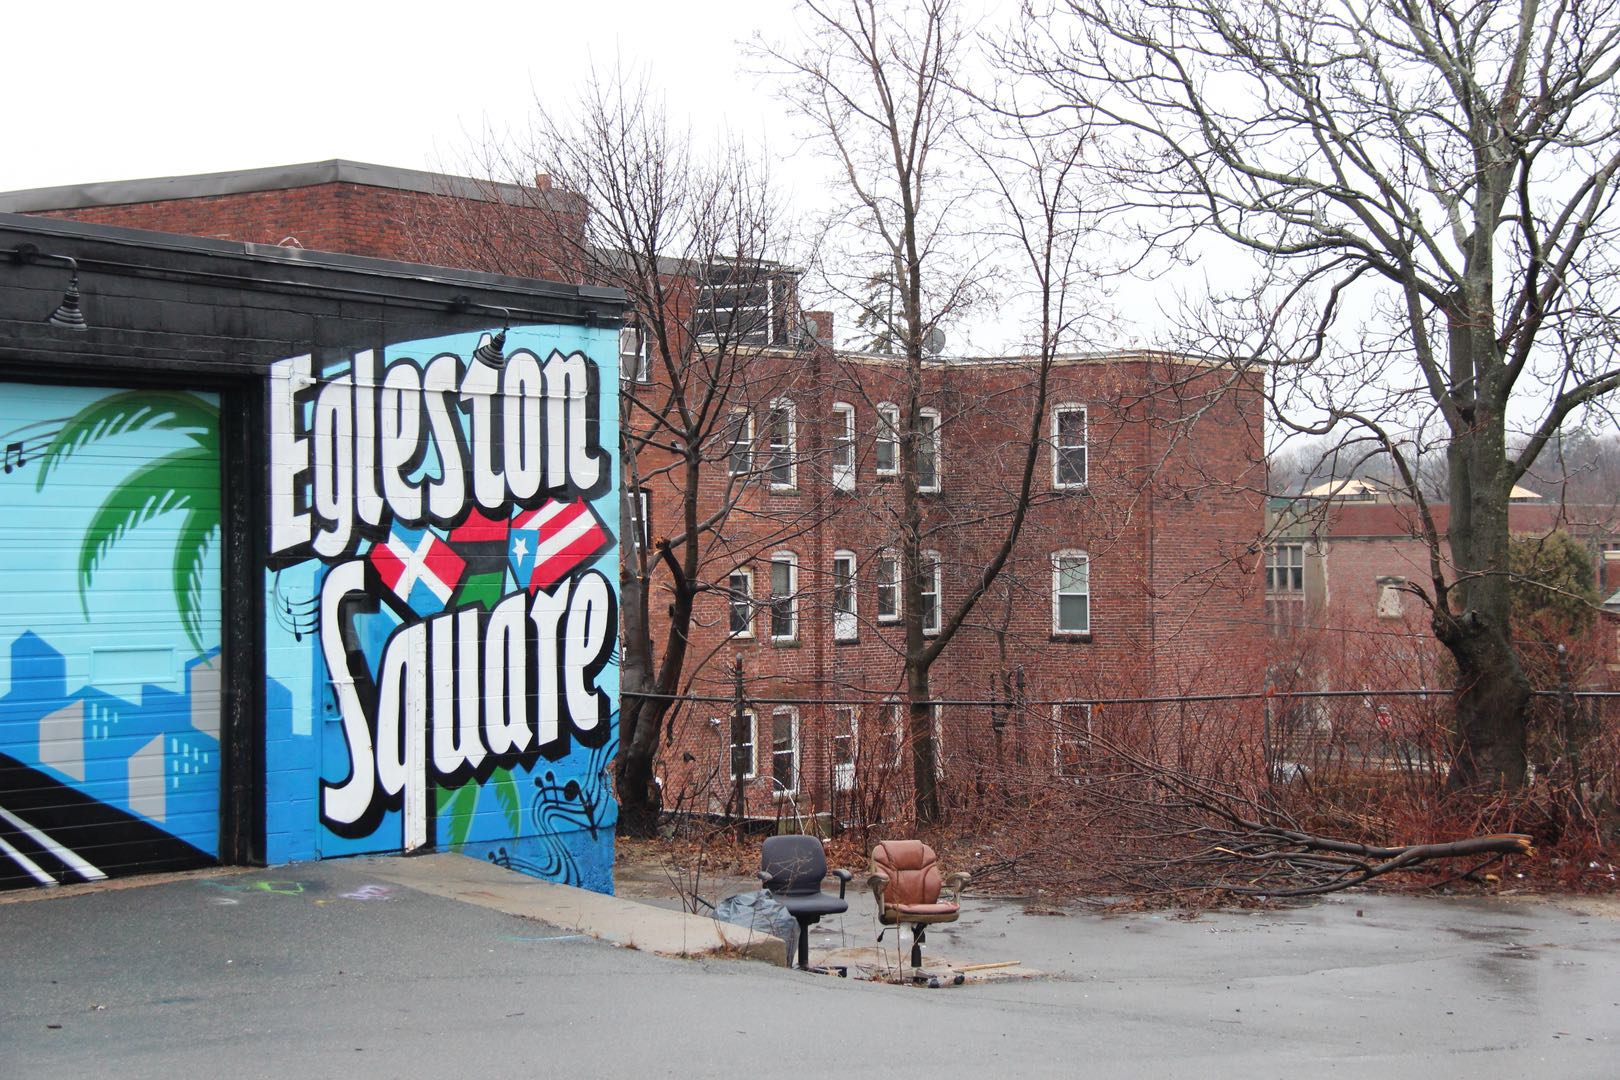 Egleston Square: A City Divided in Life and Death